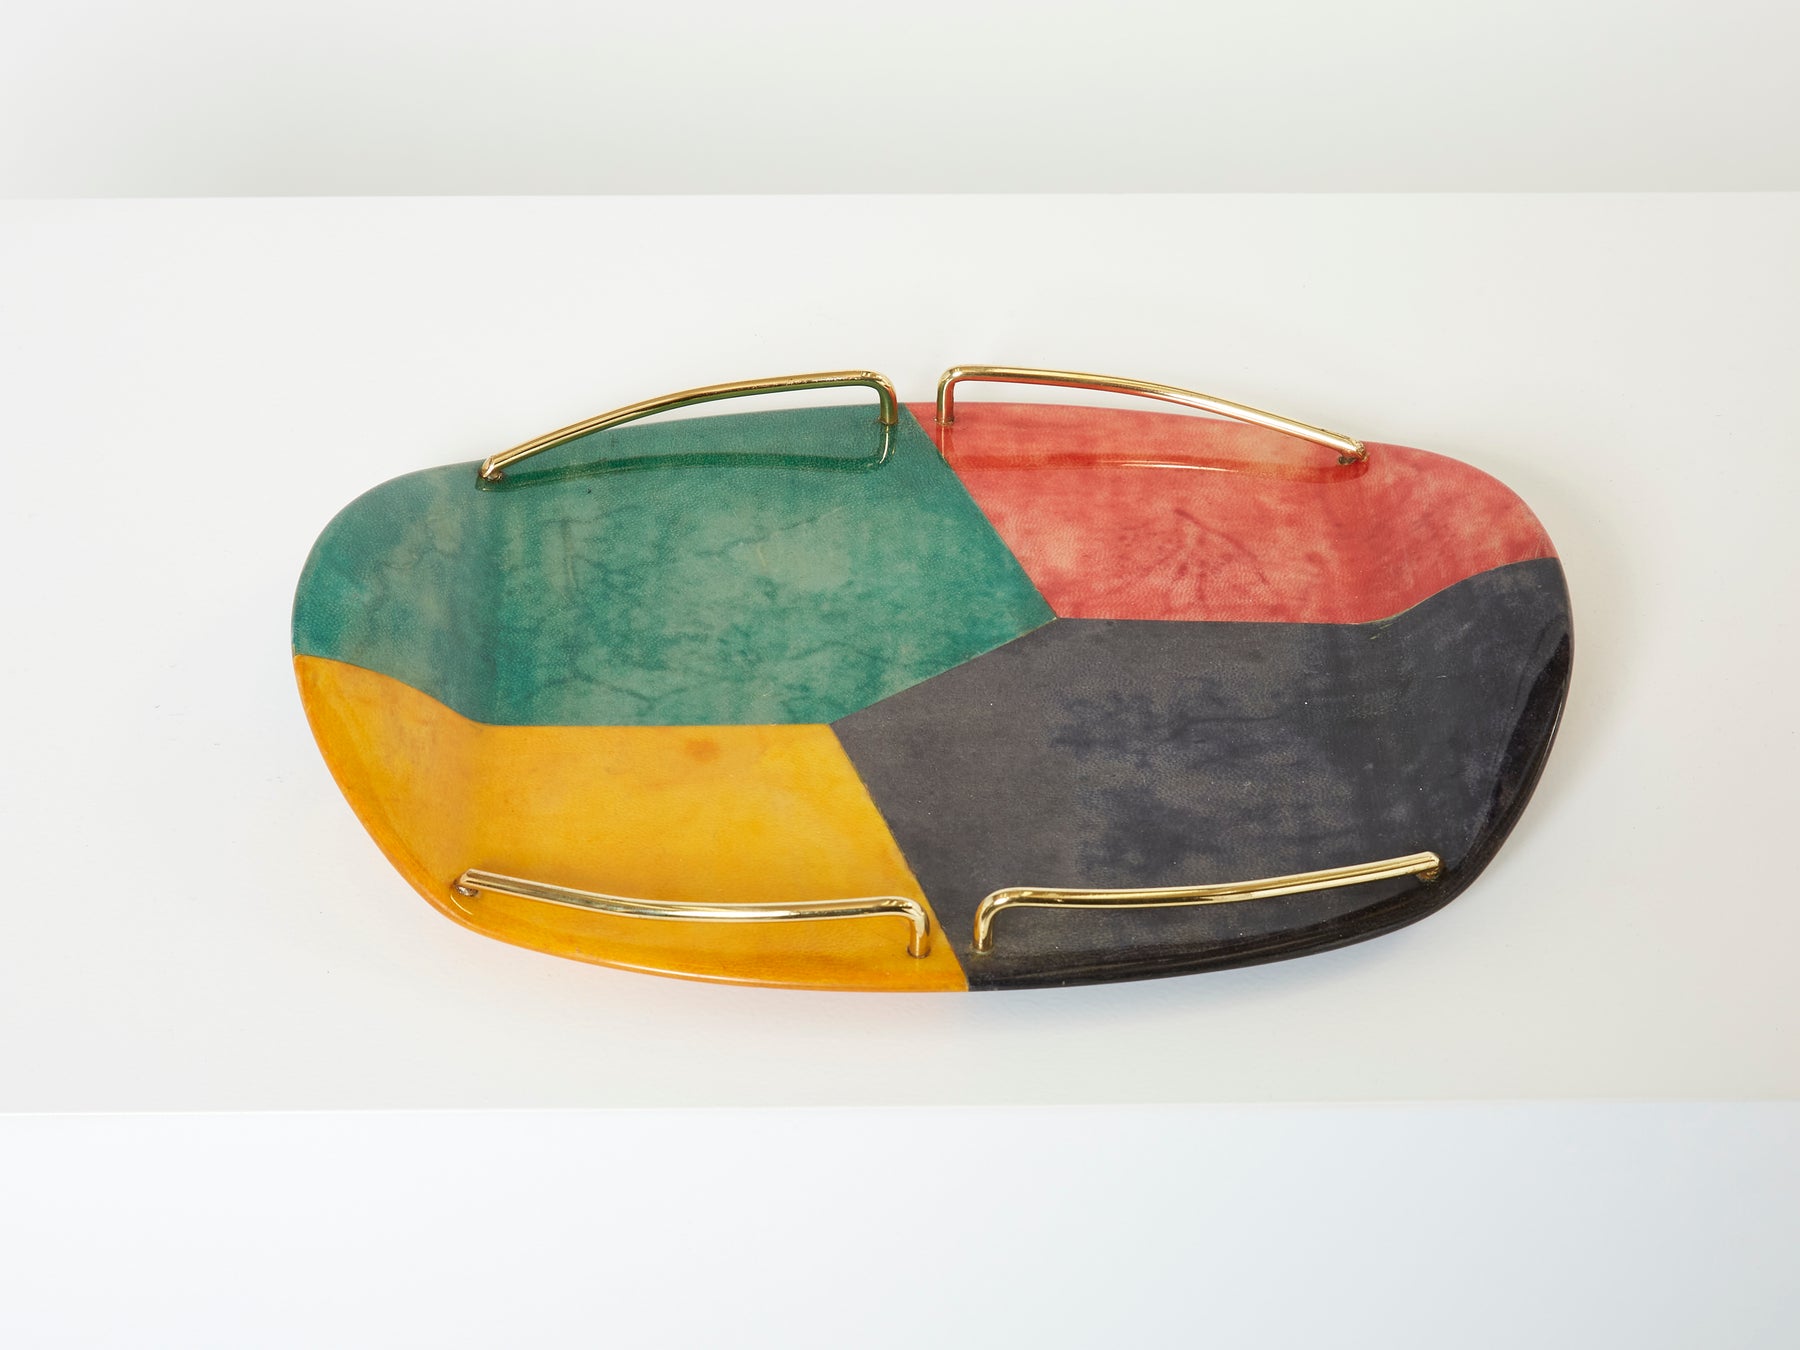 Aldo Tura goatskin and brass small serving tray for Macabo Milano 1960